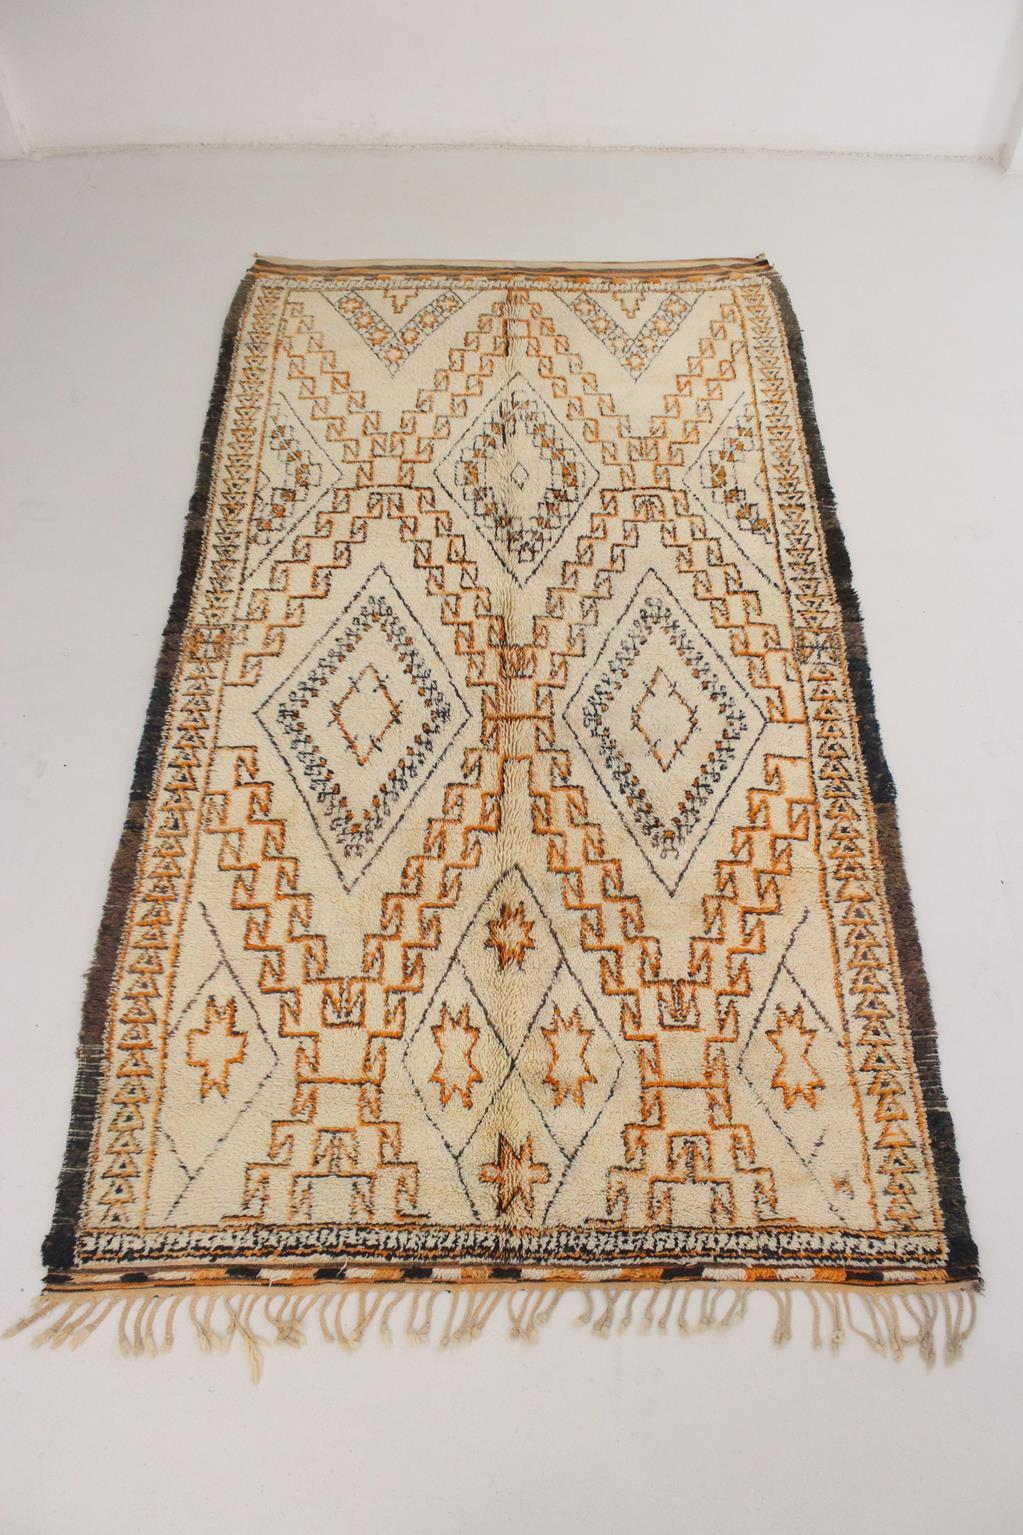 I fell in love at first sight with this thick, vintage Beni Ourain rug! I particularly love the busy pattern with all the diamonds into other diamonds and also the lovely stars!

The background of this Beni Ourain rug is a light beige, with black